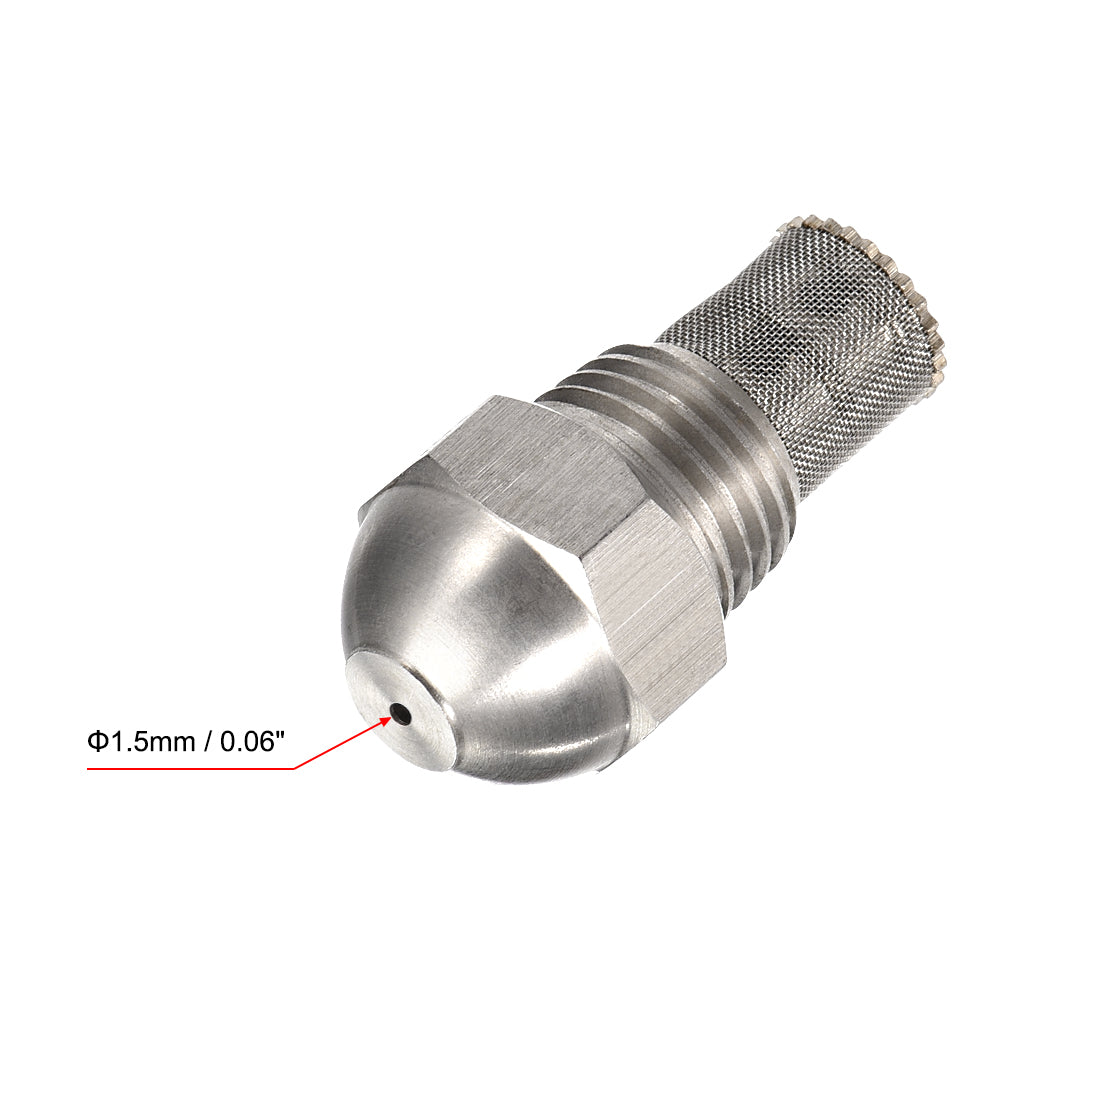 Uxcell Uxcell Mist Nozzle - 1/4BSPT 0.2mm Orifice Dia 304 Stainless Steel Fine Atomizing Spray Tip